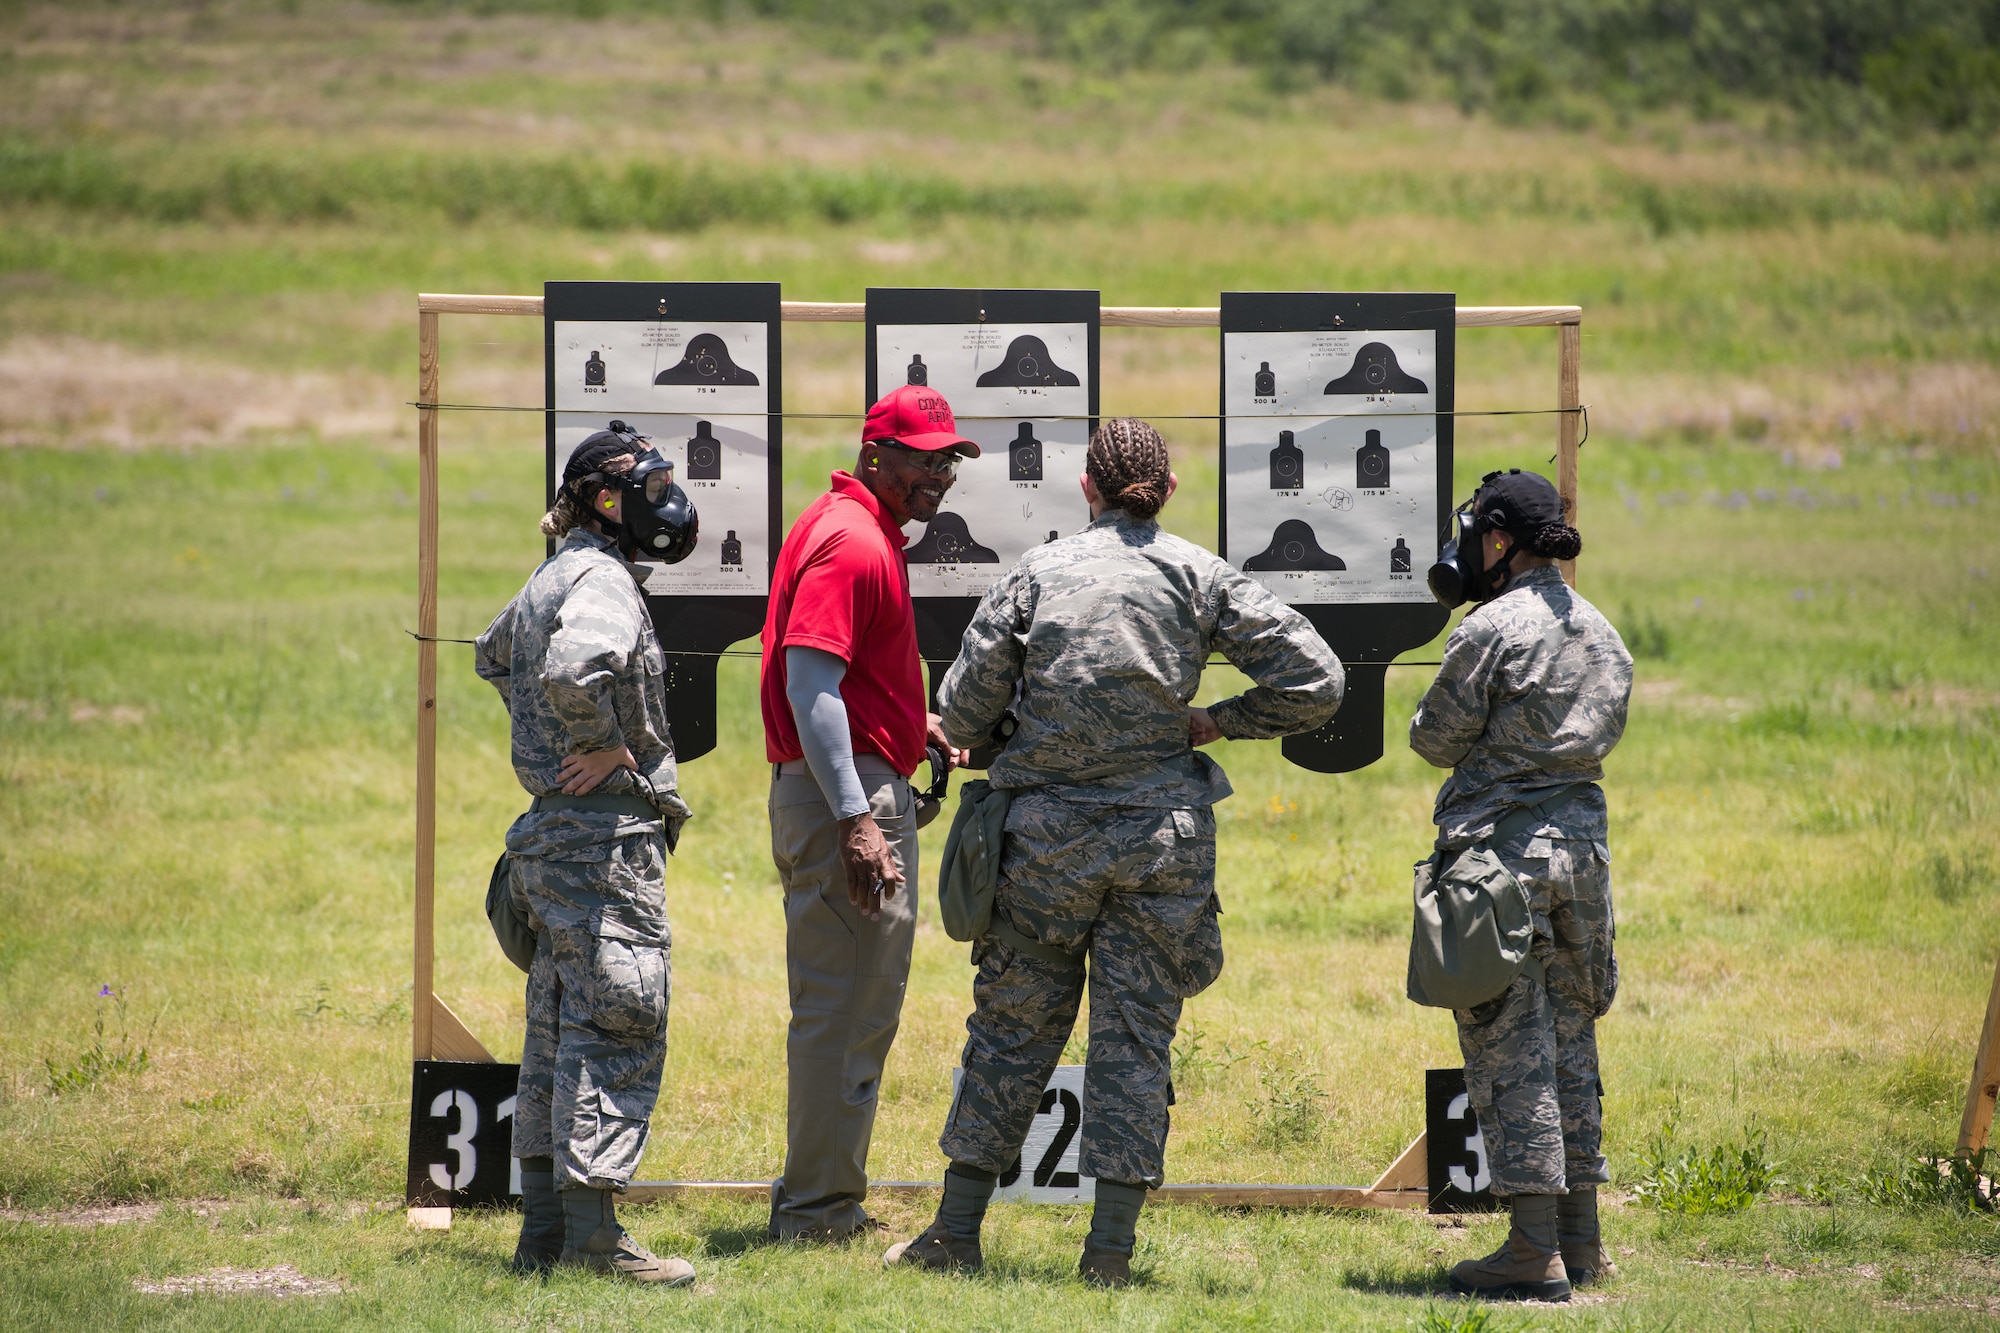 Mr. Nate Cade, 37th Training Support Squadron combat arms instructor, evaluates targets with BMT trainees during a weapons familiarization course, July 8, 2019, at Joint Base San Antonio-Medina Annex. BMT trainees were the first to experience M-4 Carbine Weapons Familiarization Course at the new facility, which closed in November 2018, due to improper rainwater drainage. The firing range allows instructors to train 244 BMT trainees daily, four days a week, qualifying more than 40,000 BMT trainees in the M-4 carbine annually. (U.S. Air Force photo by Sarayuth Pinthong)